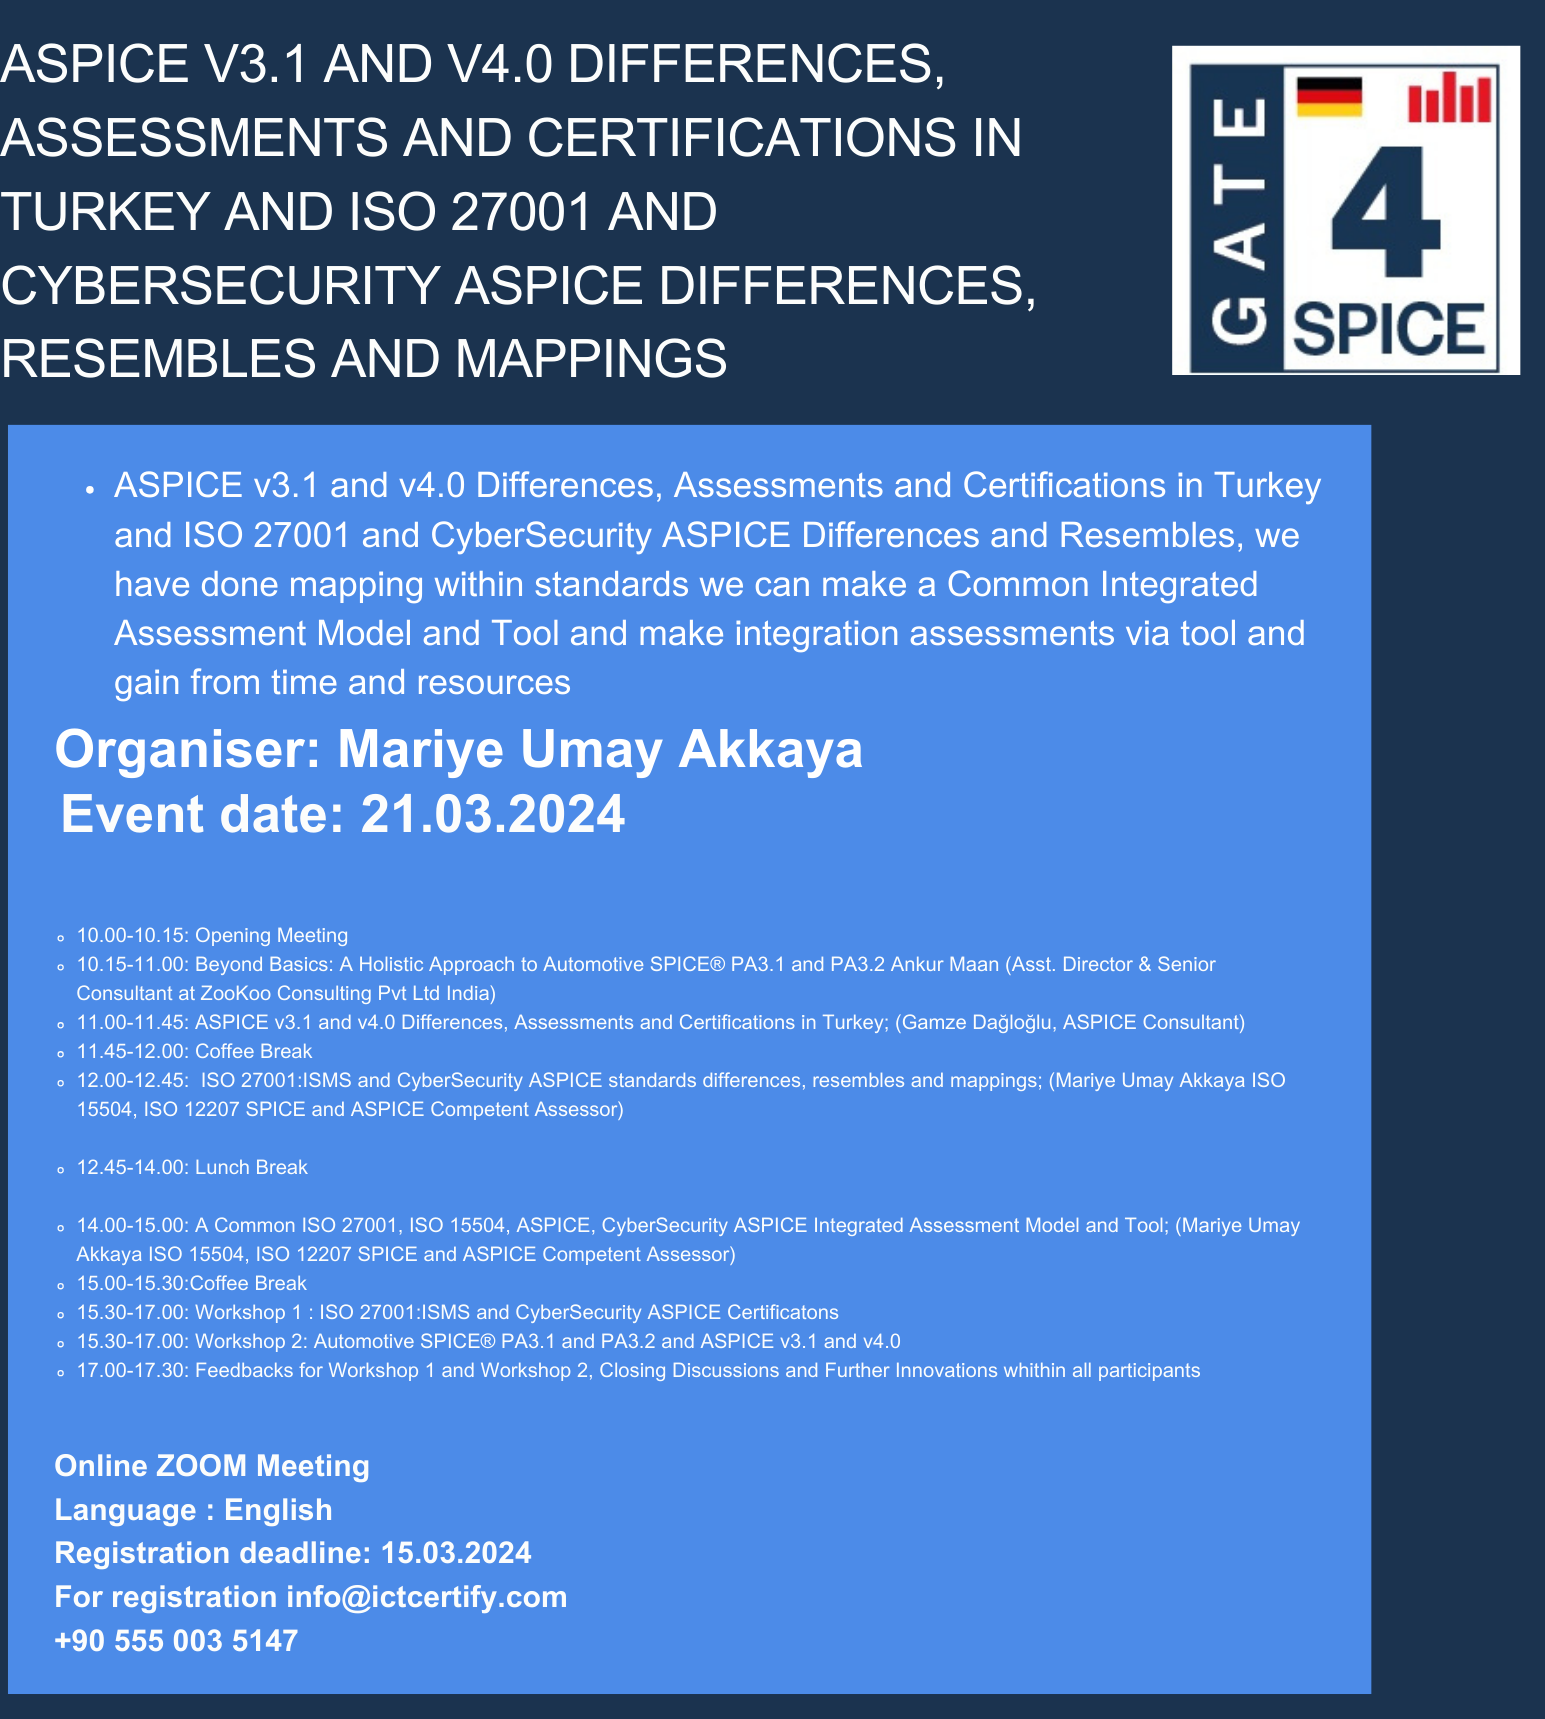 ASPICE v3.1 and v4.0 Differences, Assessments and Certifications in Turkey and ISO 27001 and CyberSecurity ASPICE Differences, Resembles and Mappings